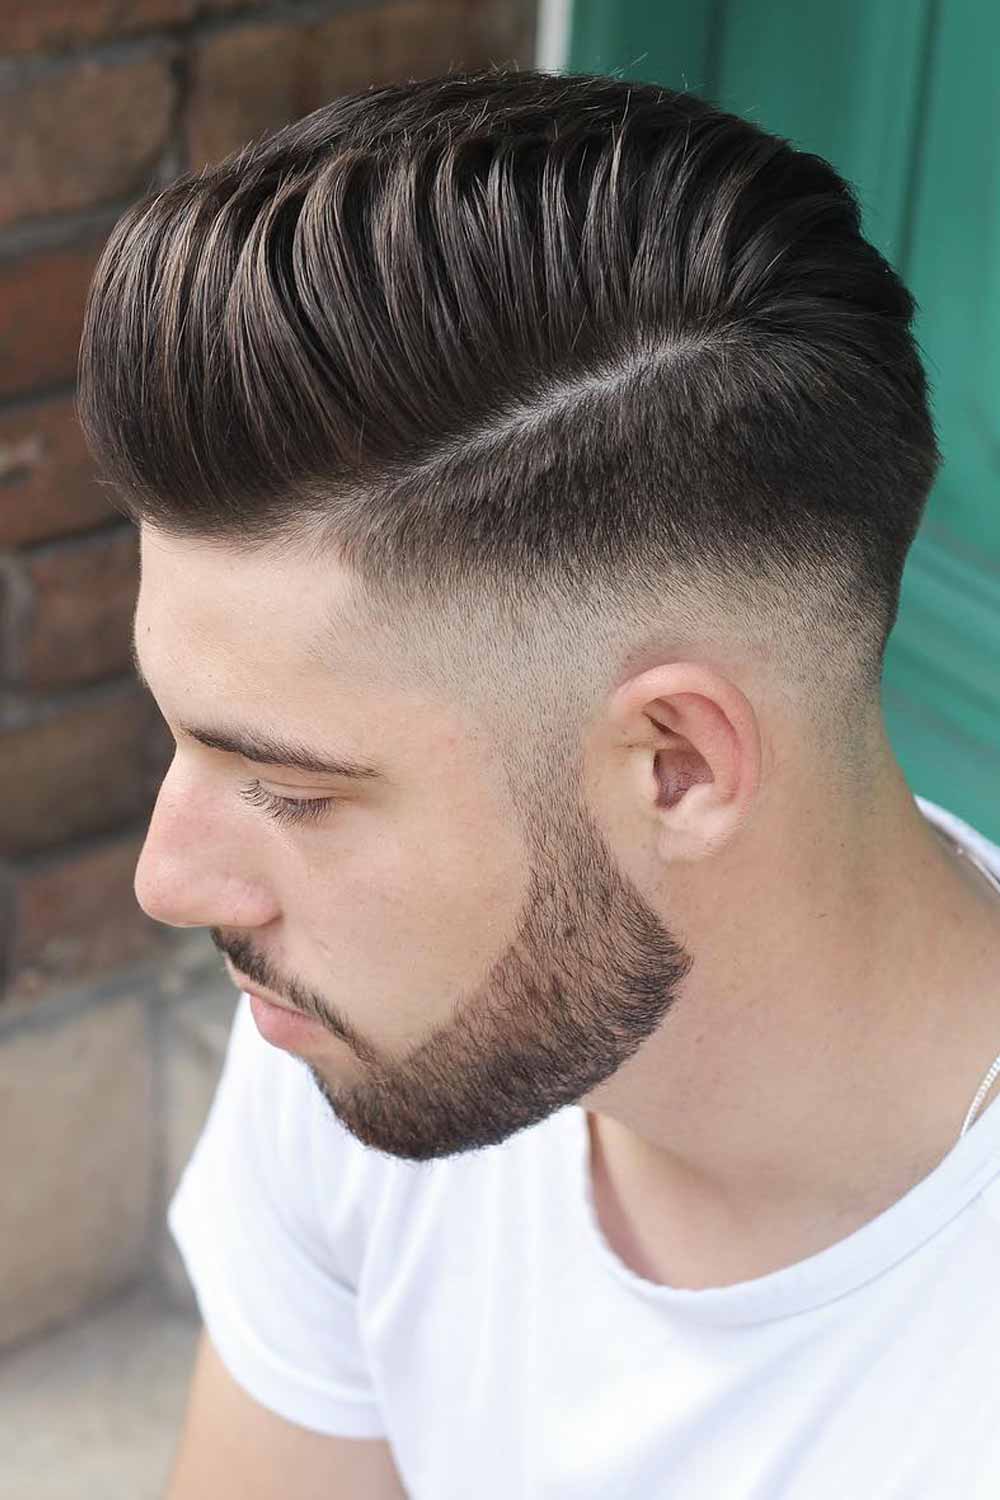 Hairstyles Men Pictures | Download Free Images on Unsplash